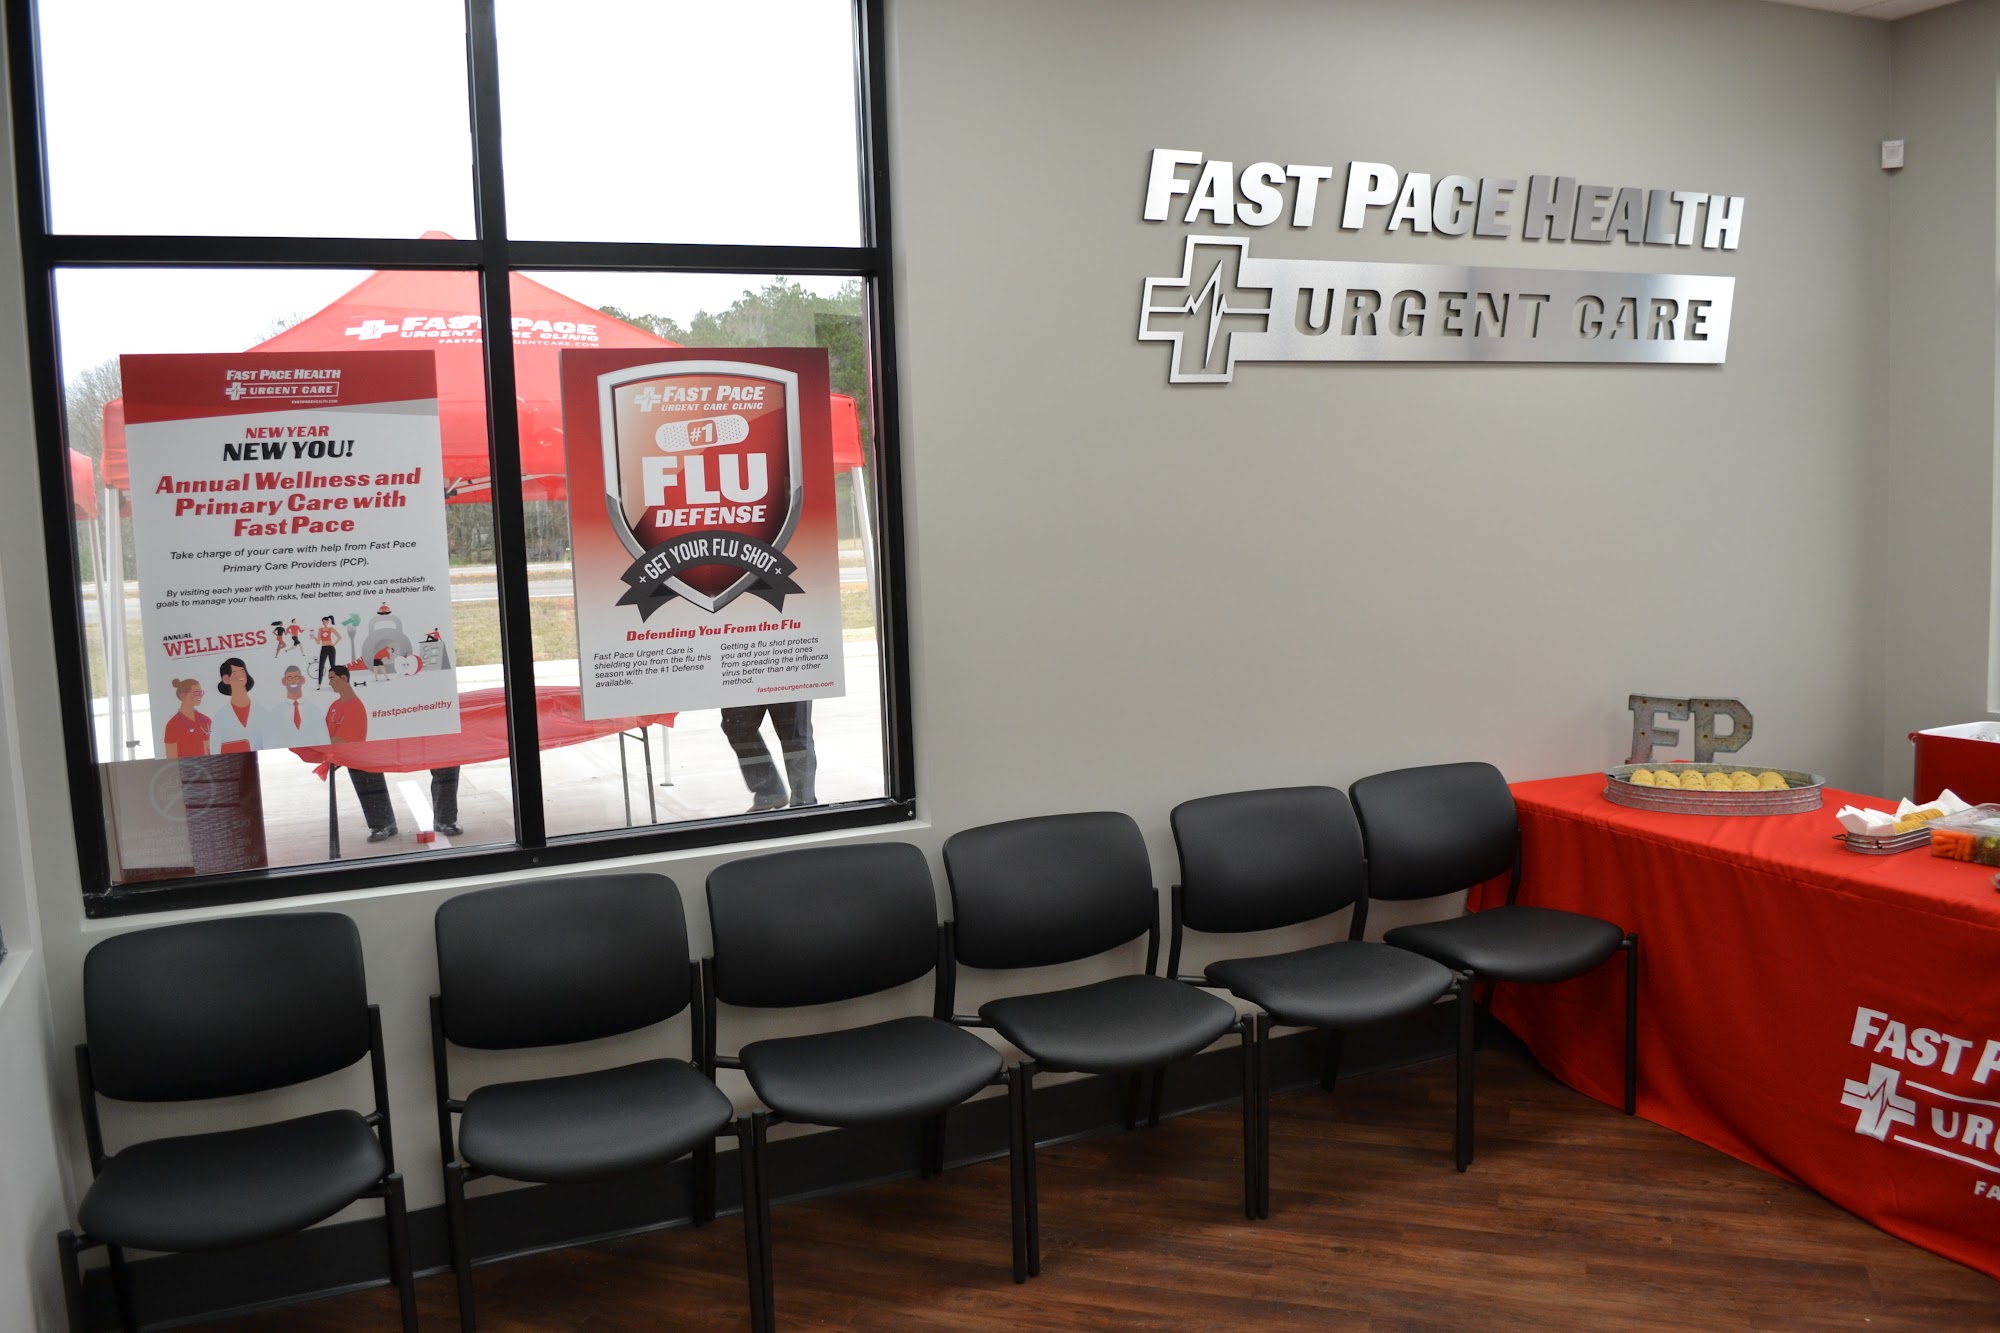 Fast Pace Health Urgent Care - Rockwood, TN 1118 N Gateway Ave, Rockwood Tennessee 37854